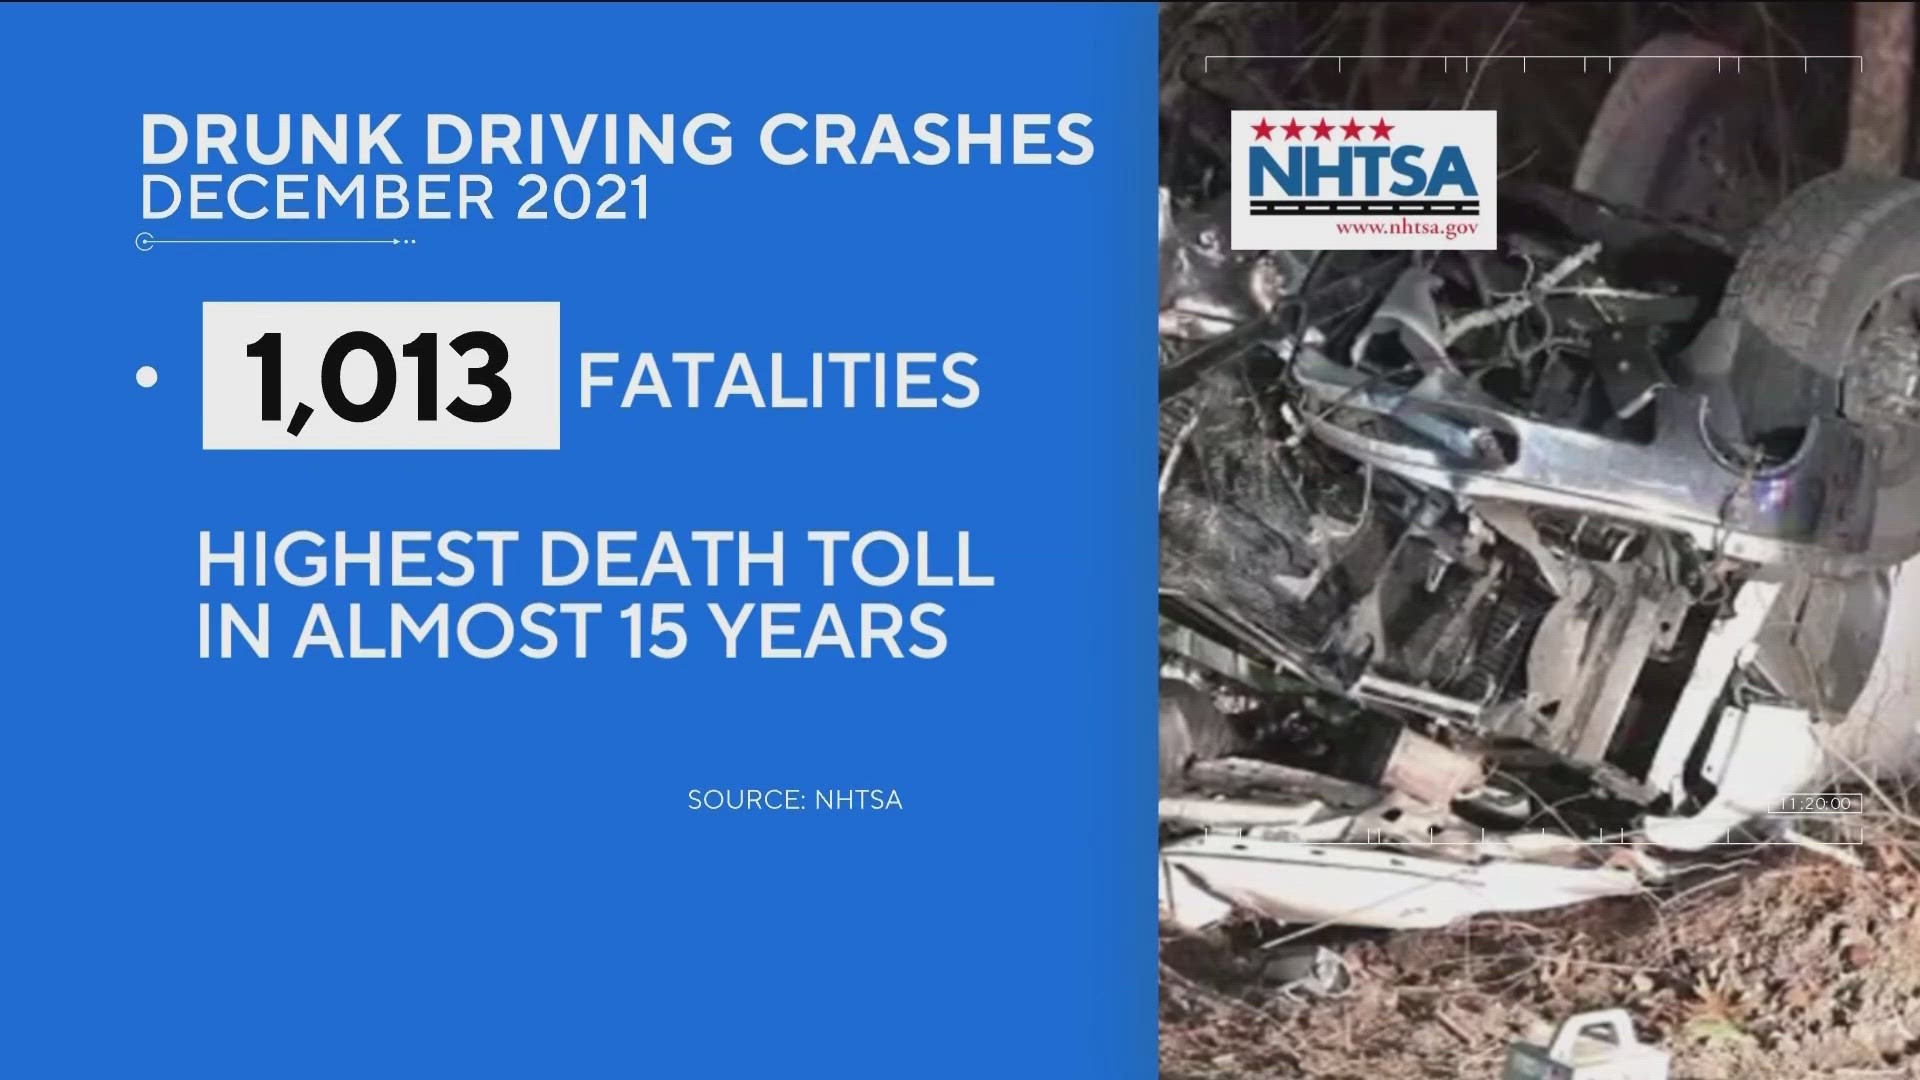 The announcement comes at the NHTSA launched its holiday drive sober campaign.